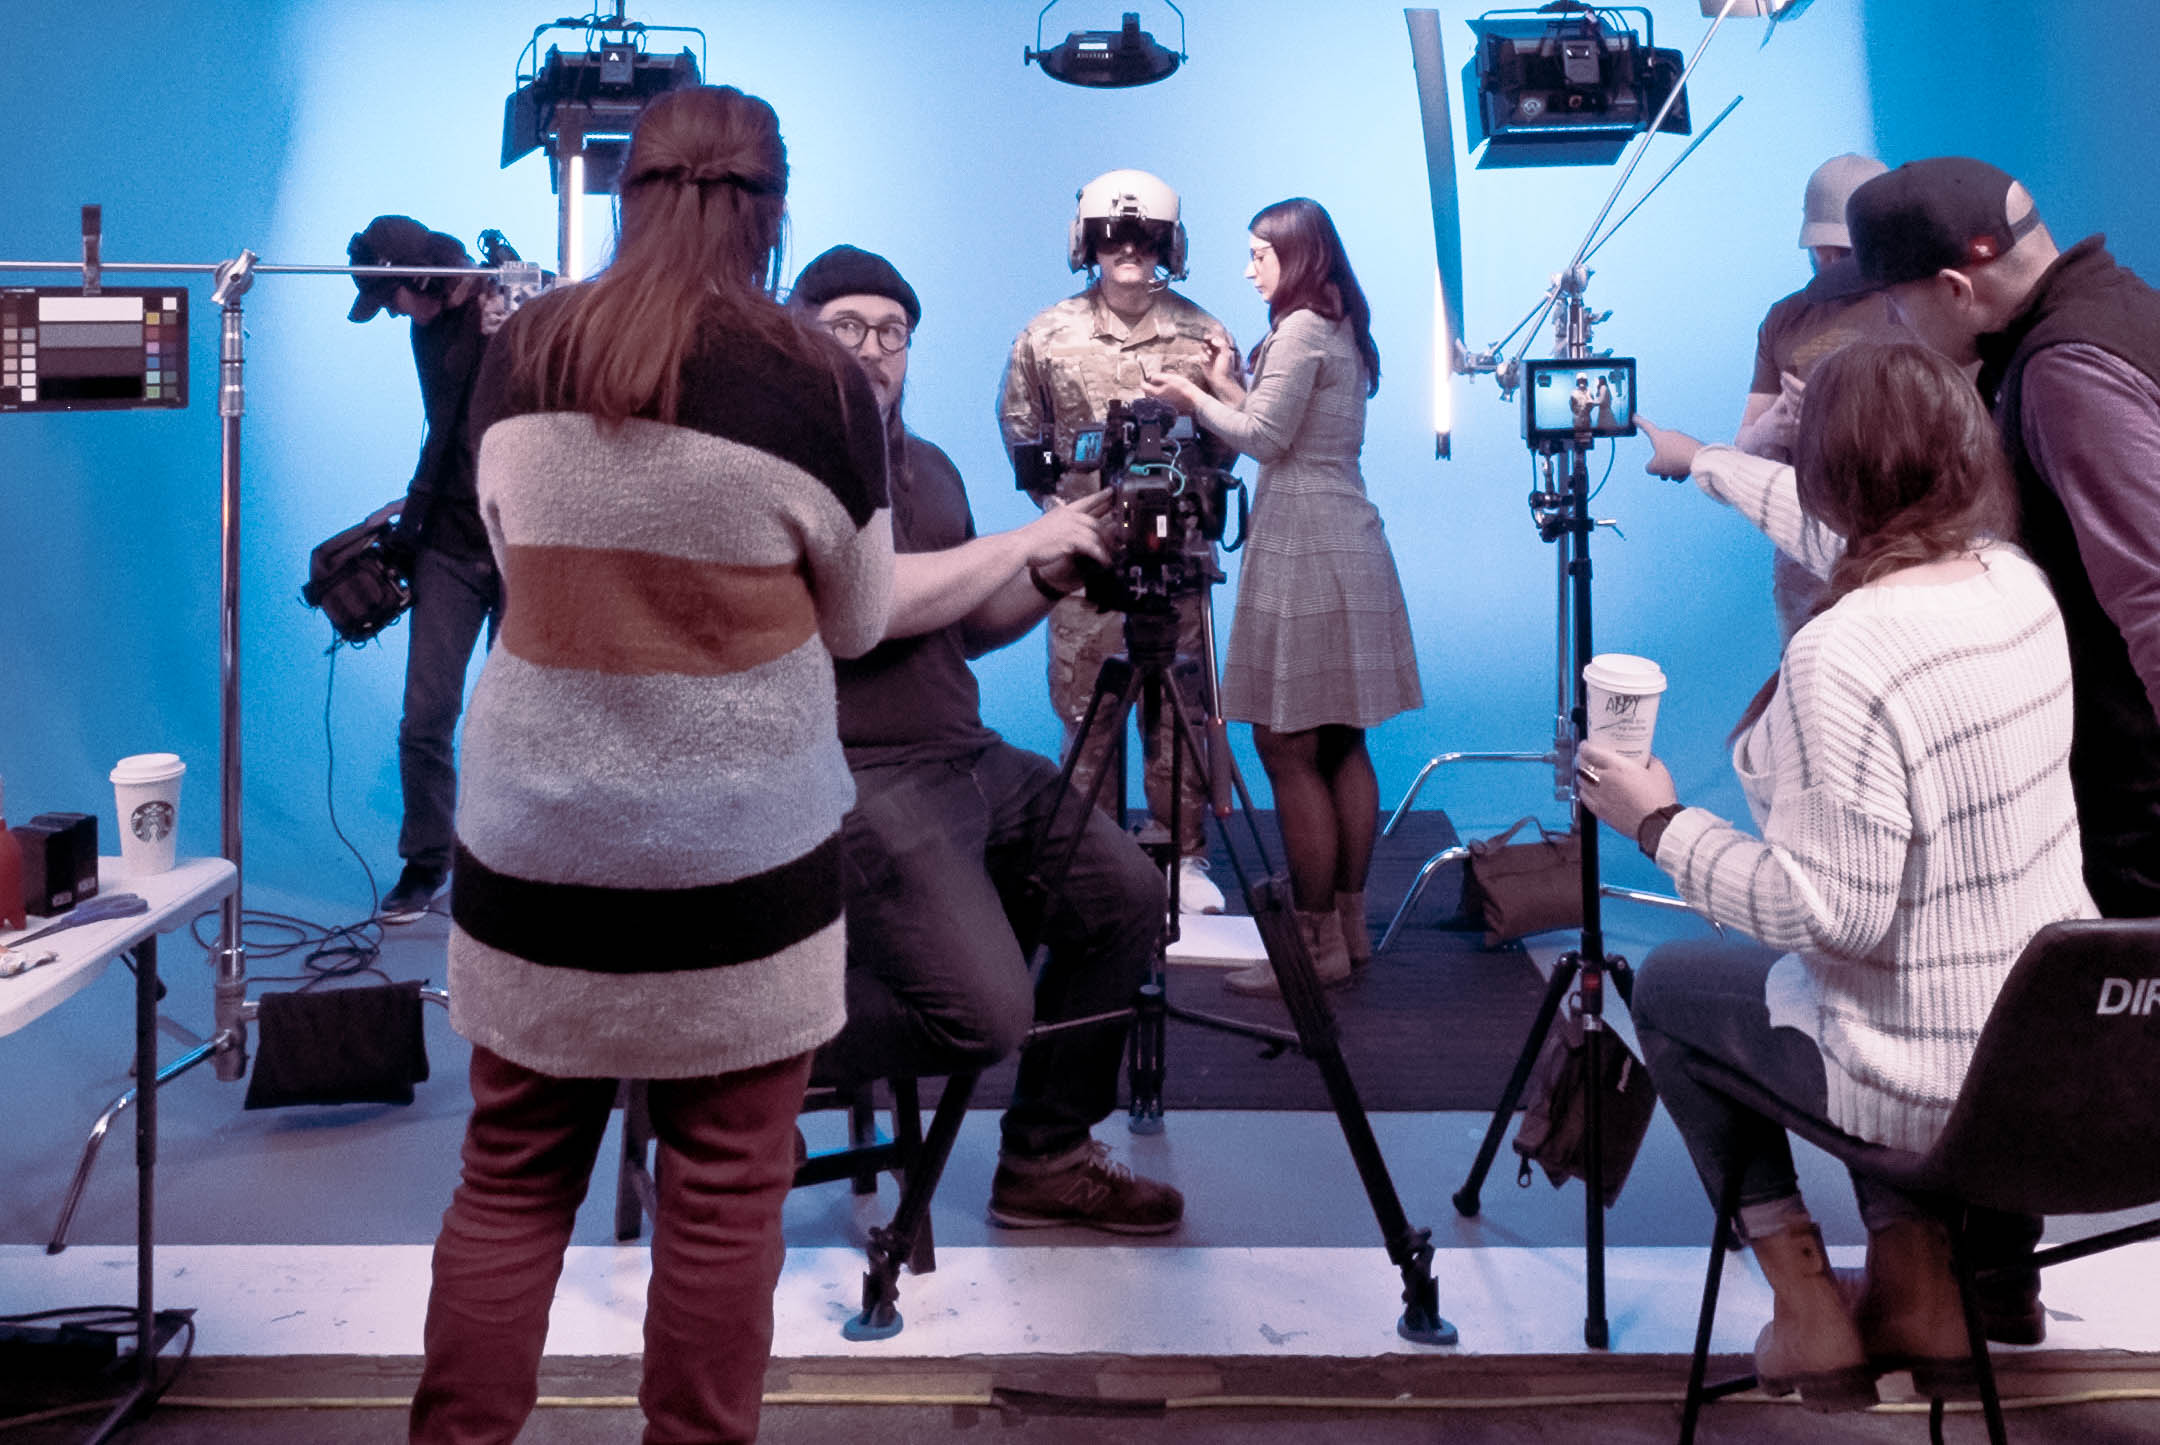 A film crew setting up cameras in a studio with blue background